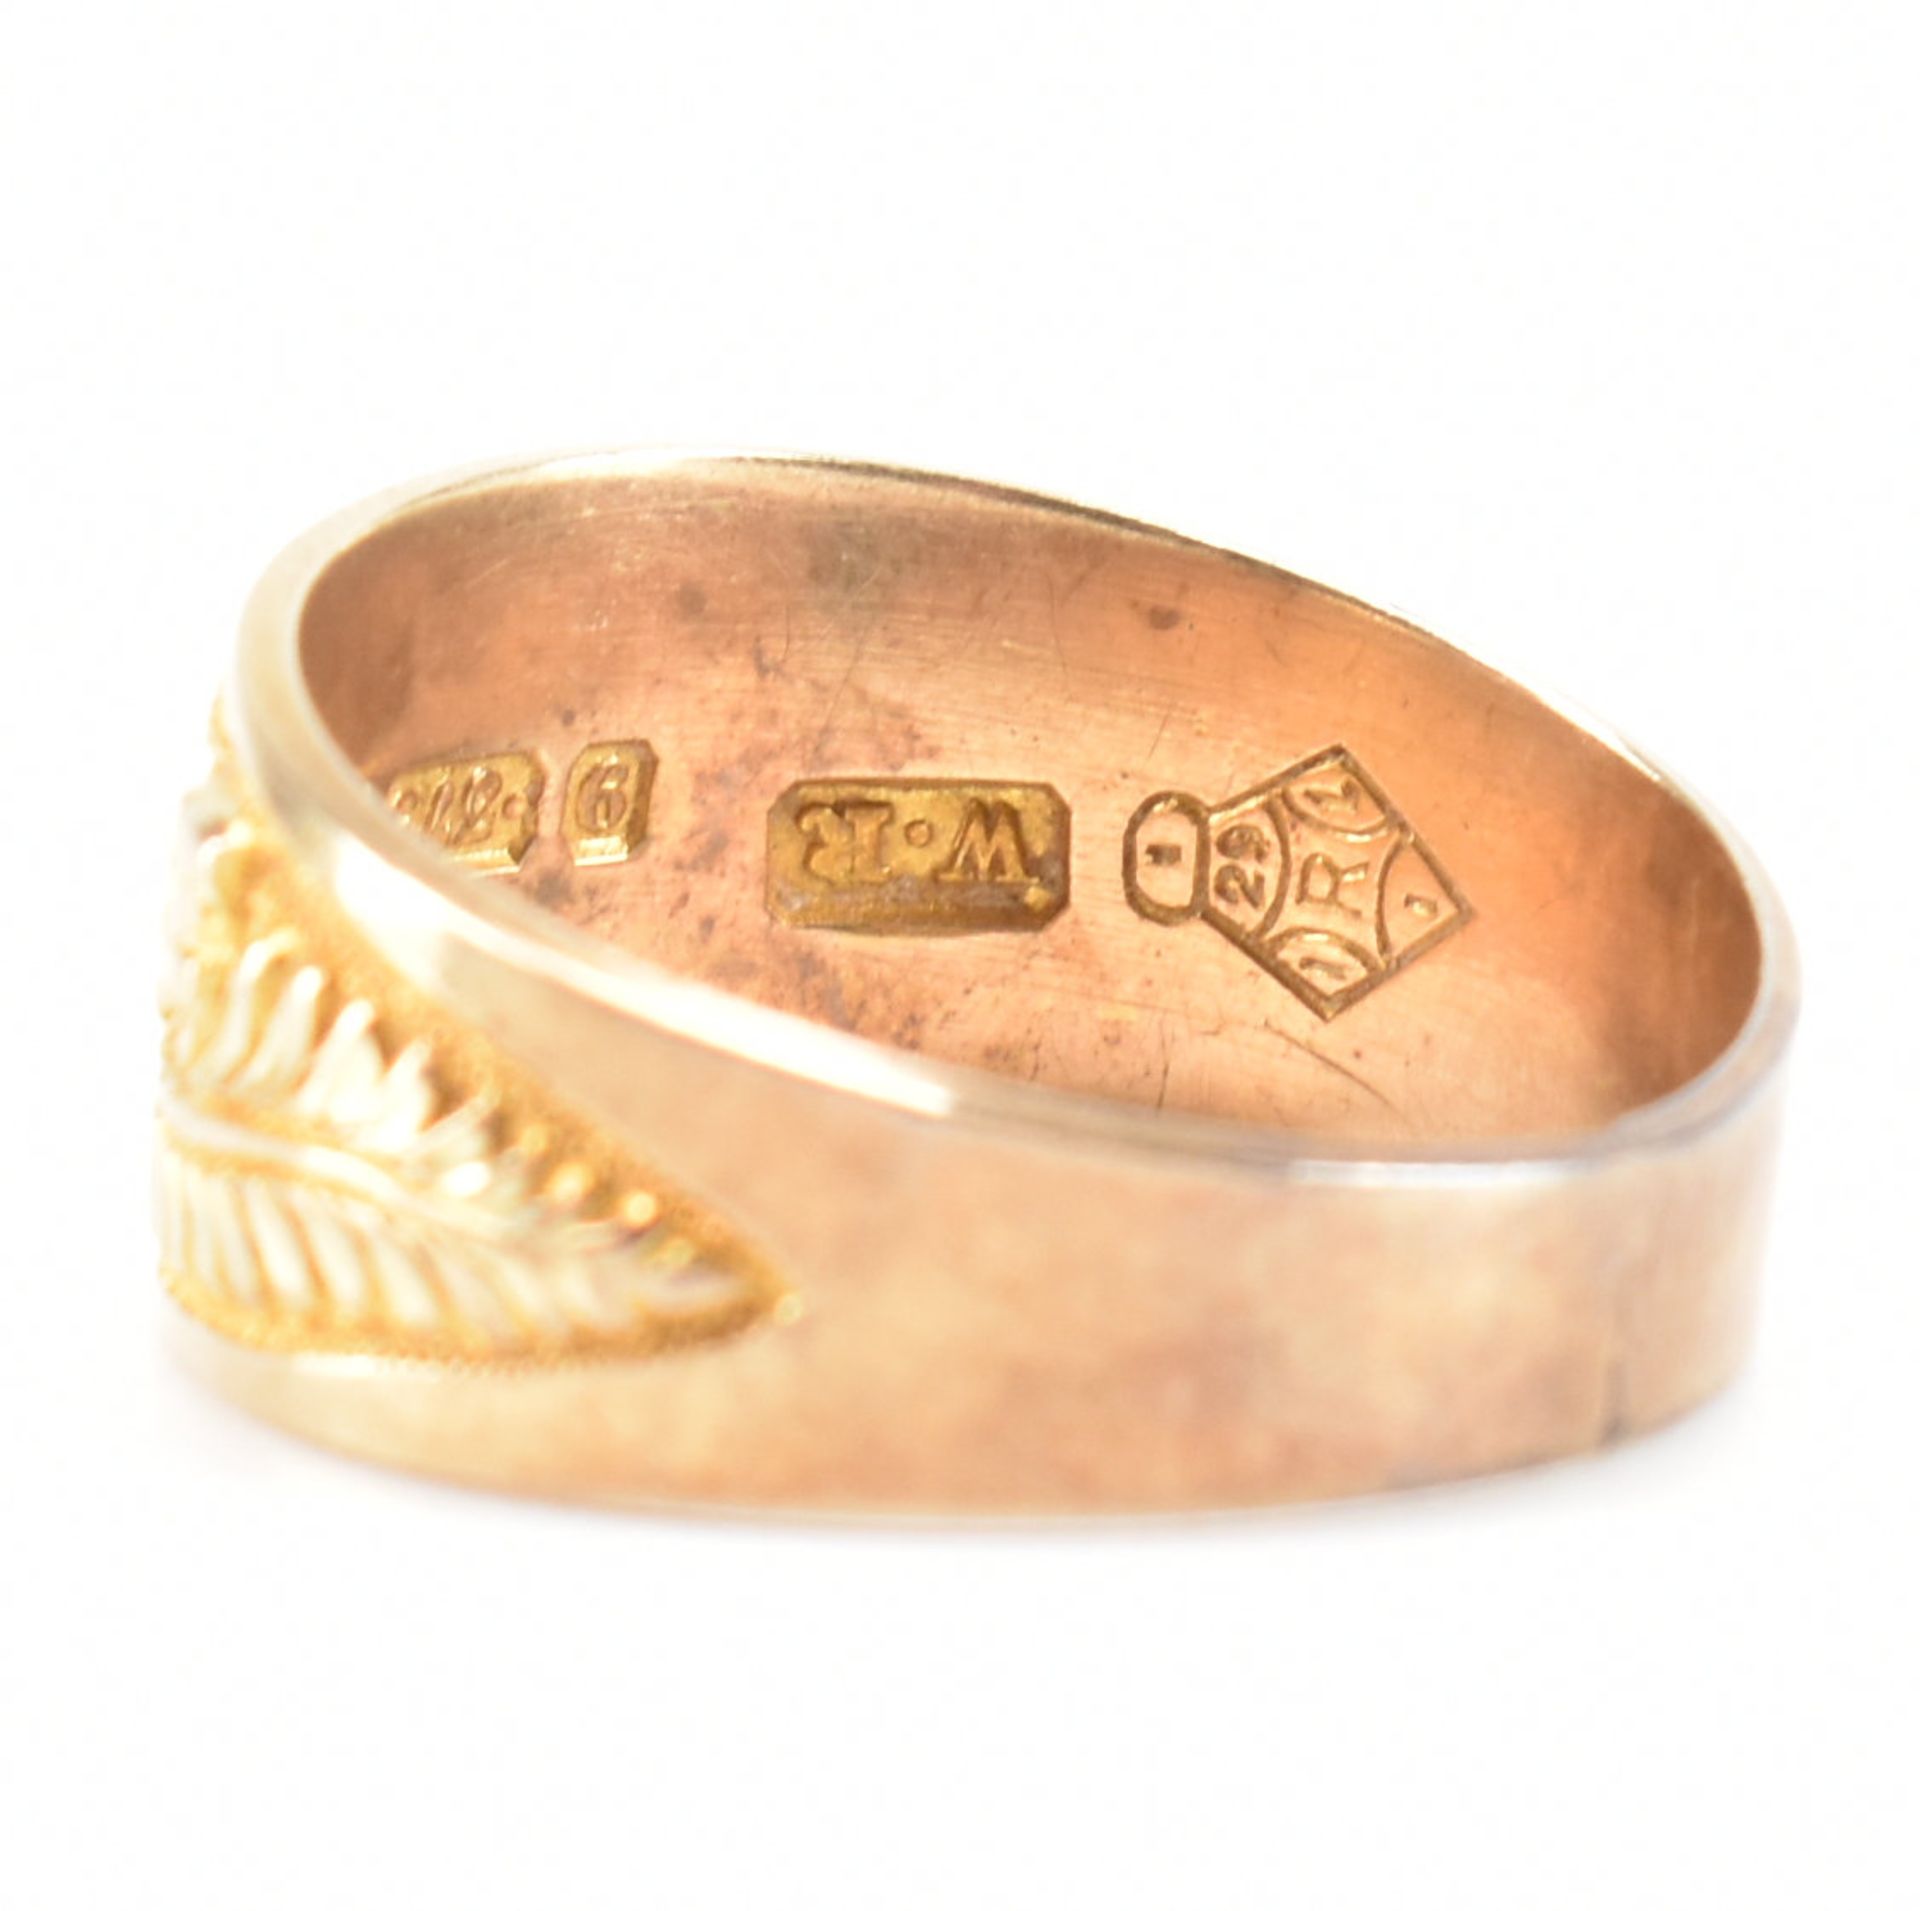 HALLMARKED VICTORIAN 9CT GOLD ETCHED BAND RING - Image 5 of 8